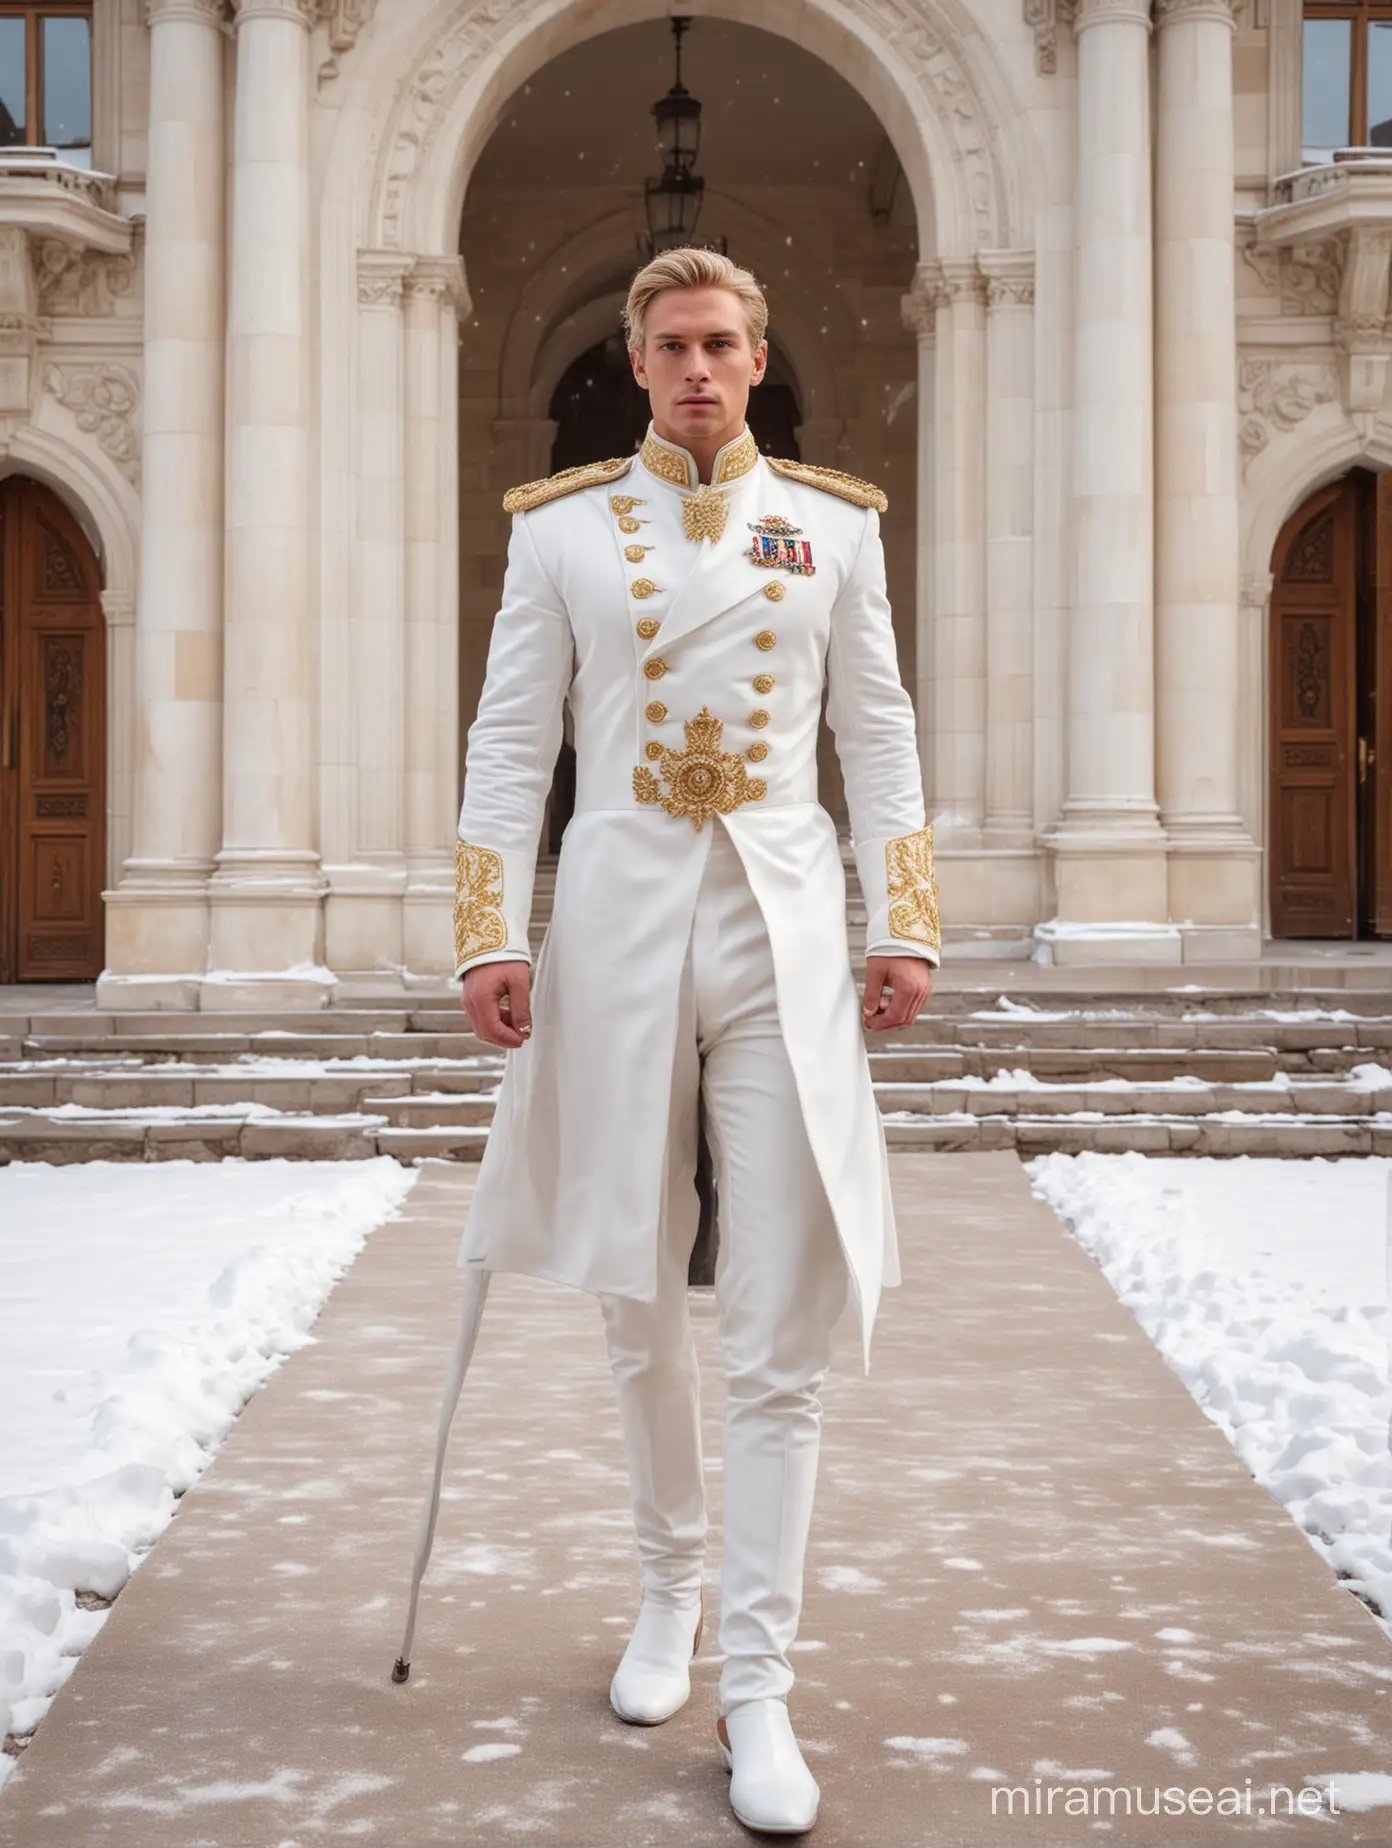 Regal King in White Cavalry Suit Walking Outside Snowy Palace